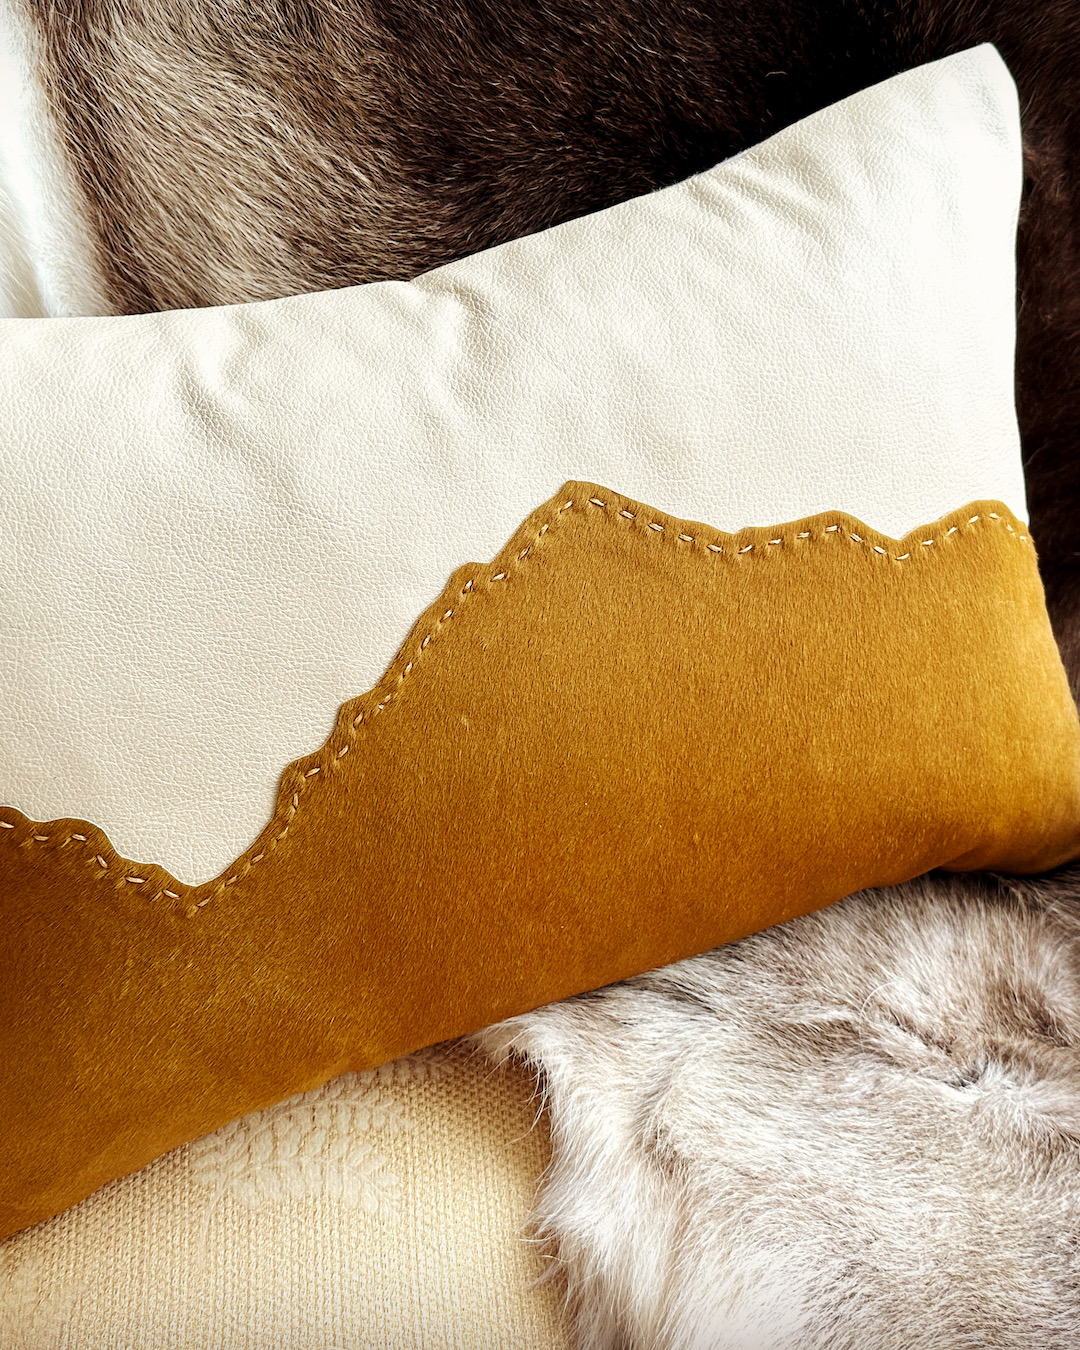 Camelback Mountain range pillow made with leather and calf hair hide